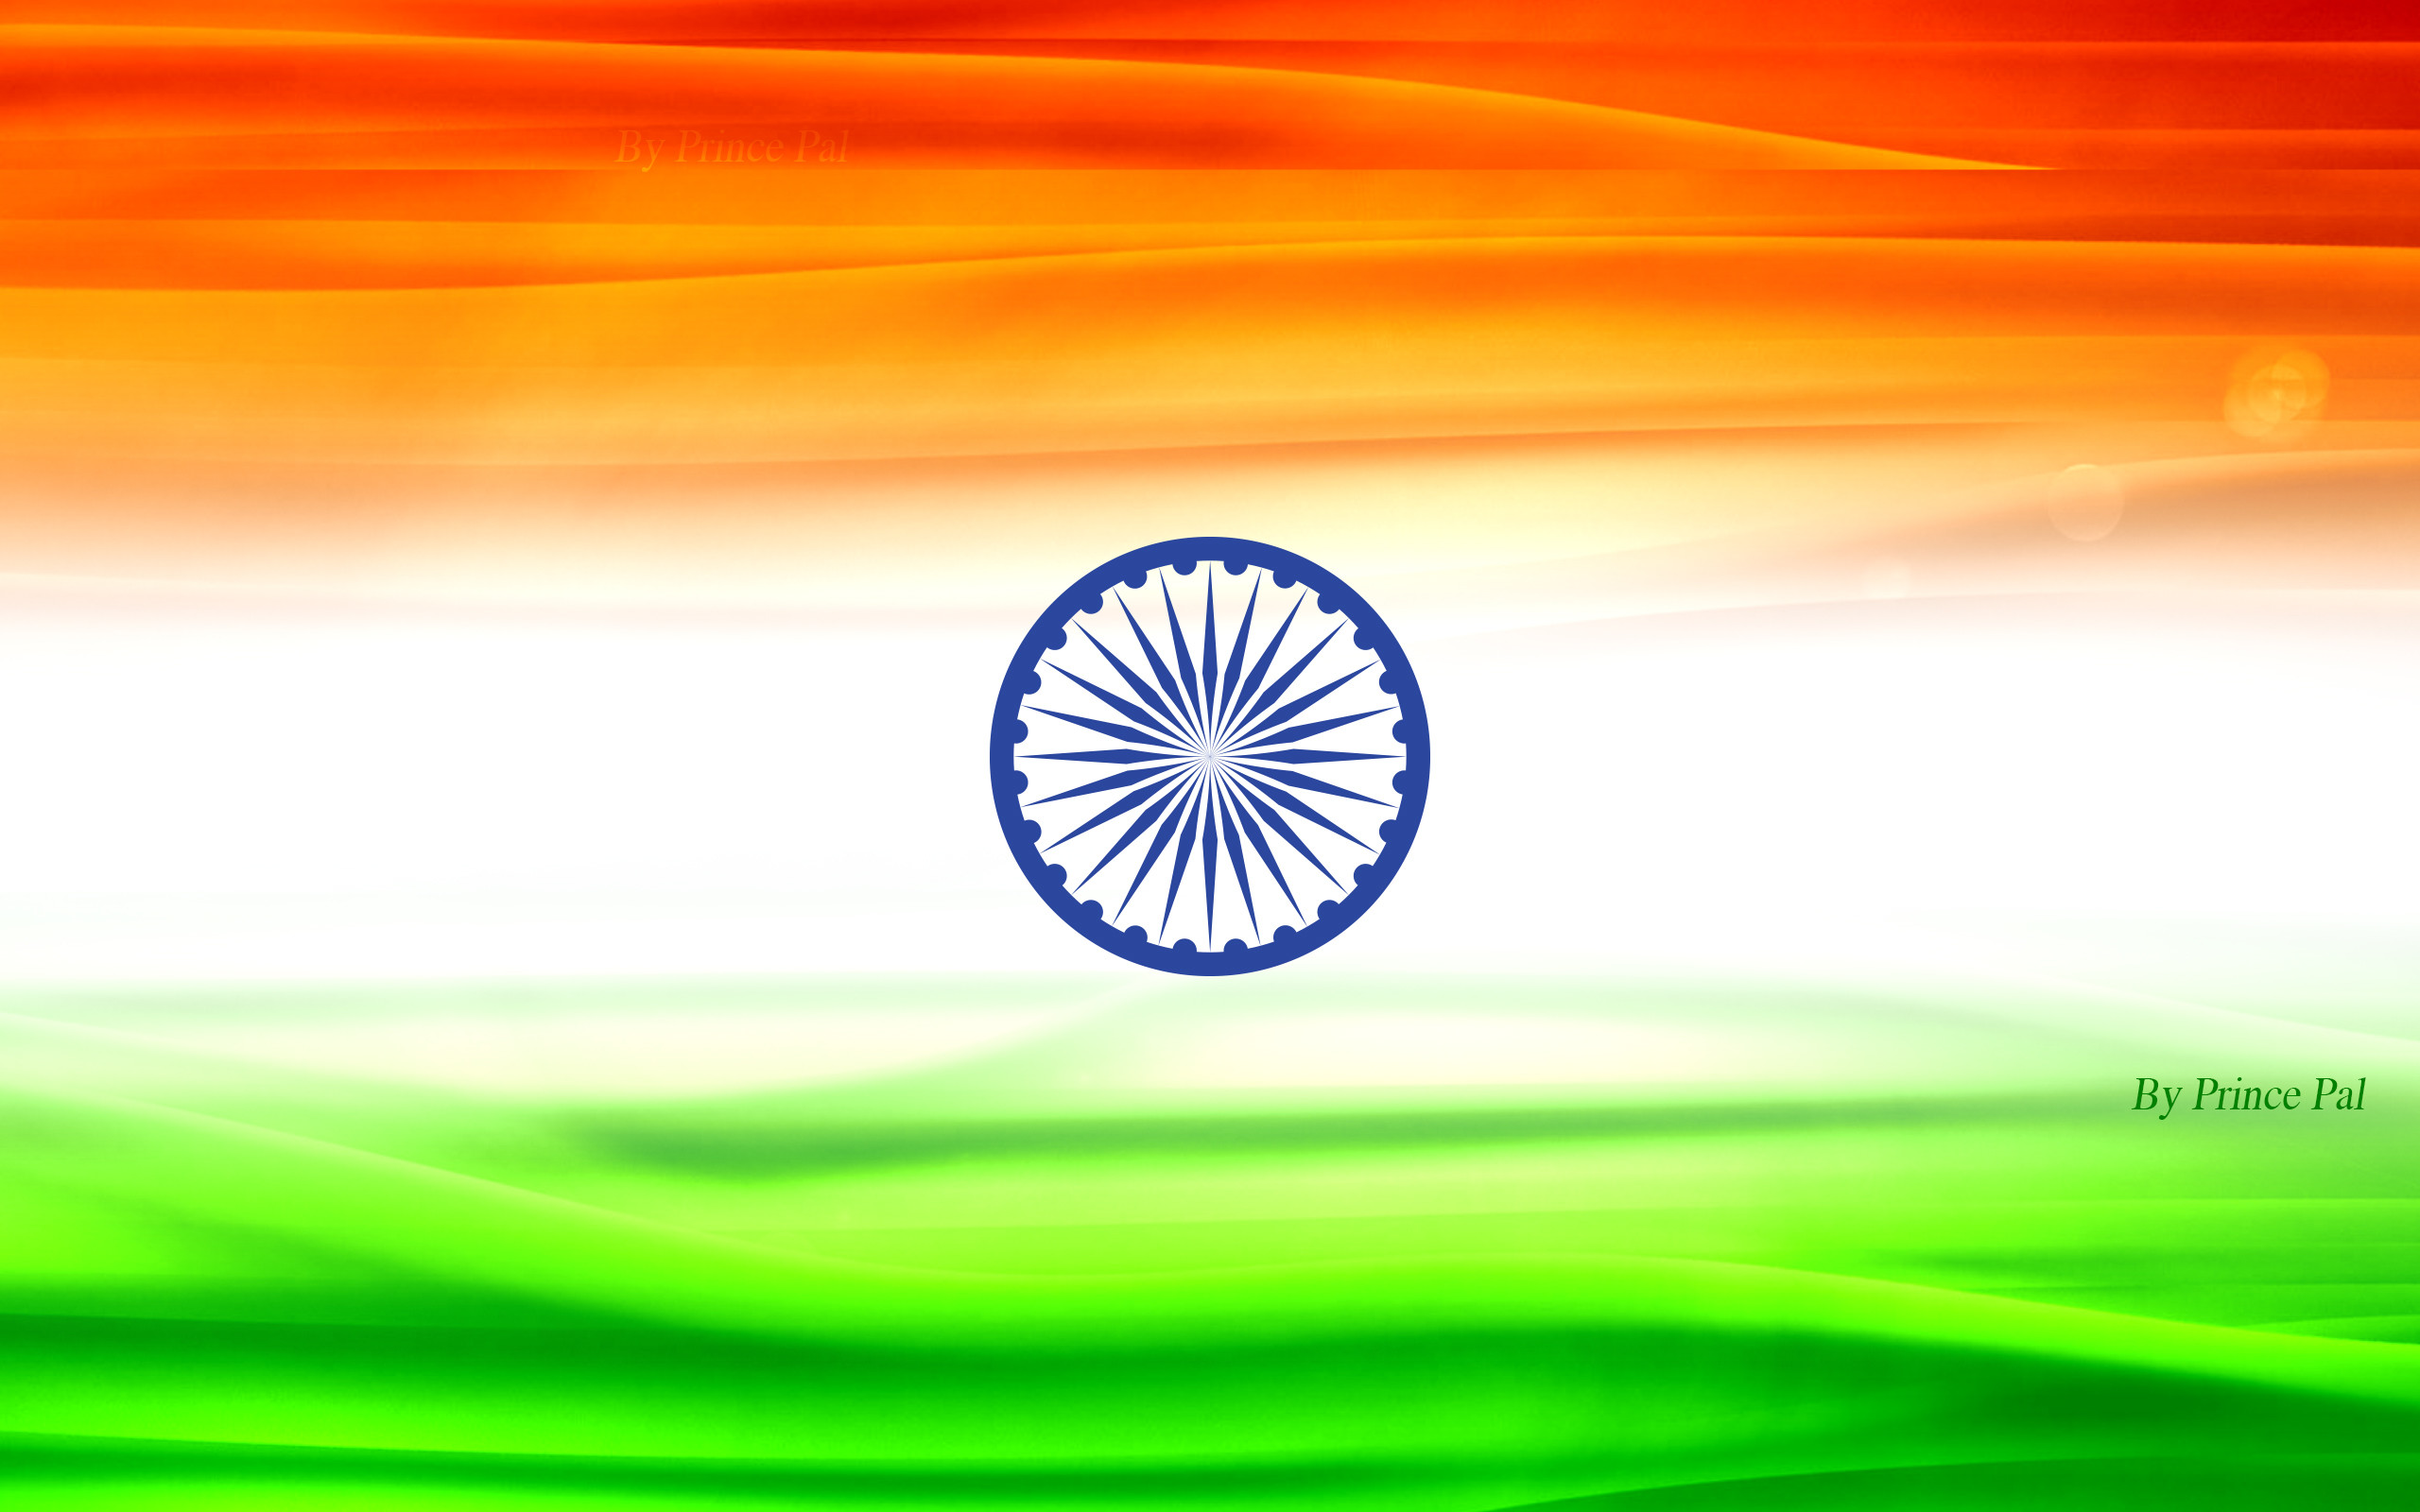 2560x1600 I am Prince Pal, A Creative Director of Think 360 Studio, Wishing you all  Happy Independence Day with my India flag wallpaper series.